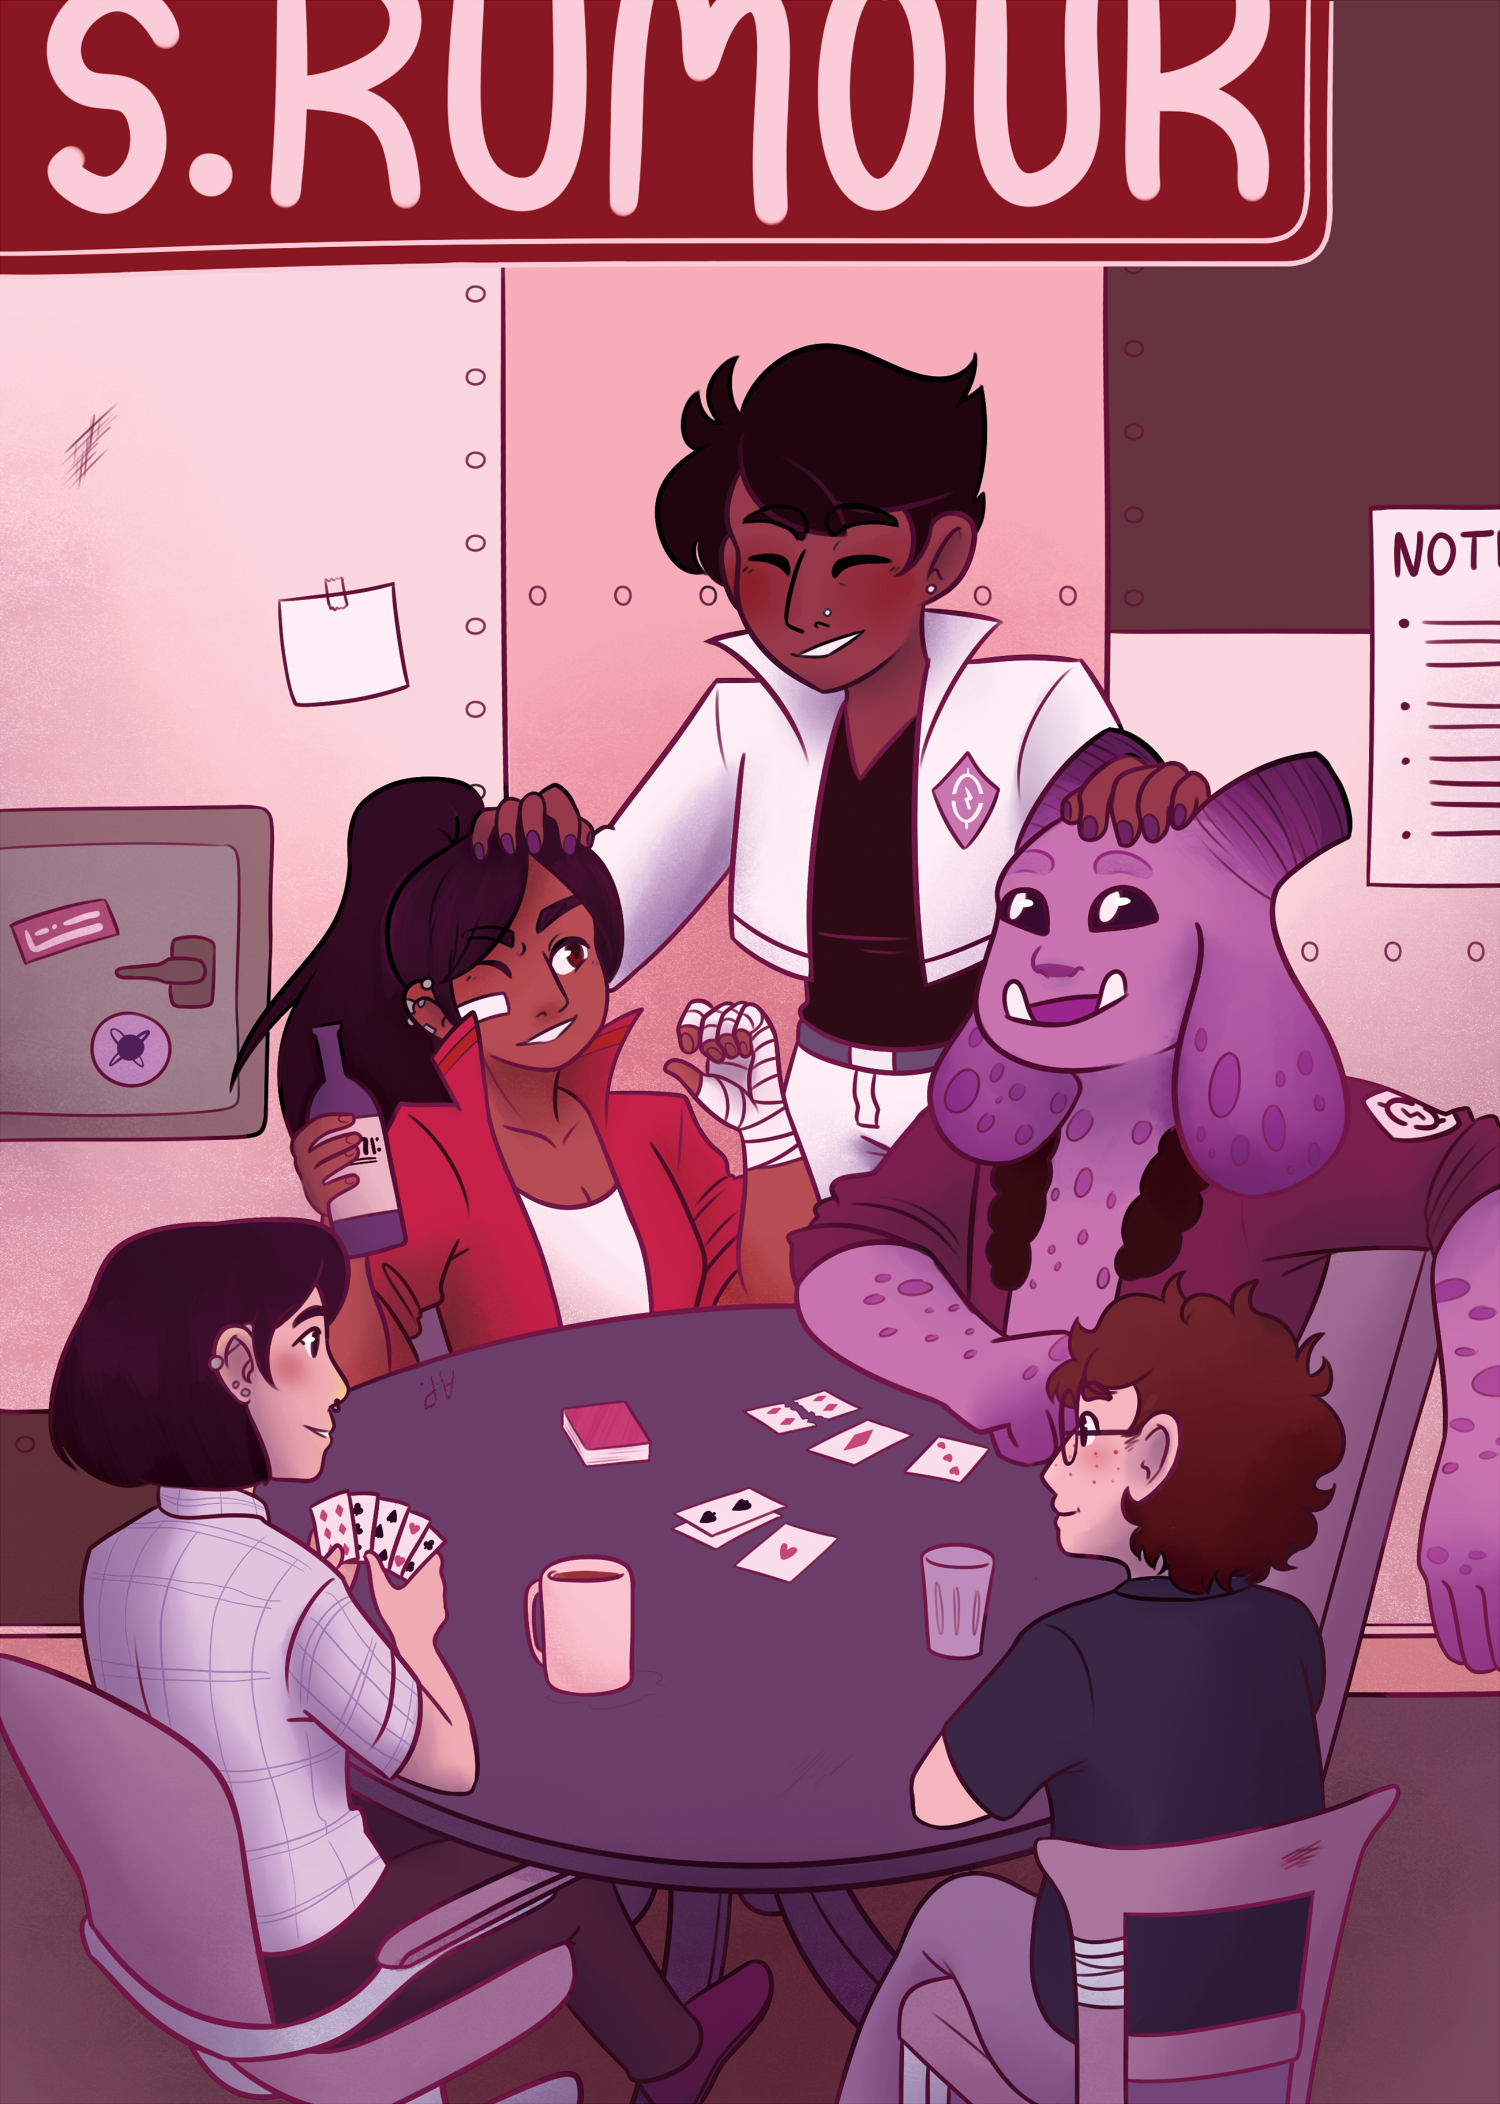  Piece for the charity fanbook “Queercasts”, of the cast of the podcast “The Strange Case of Starship Iris”. 